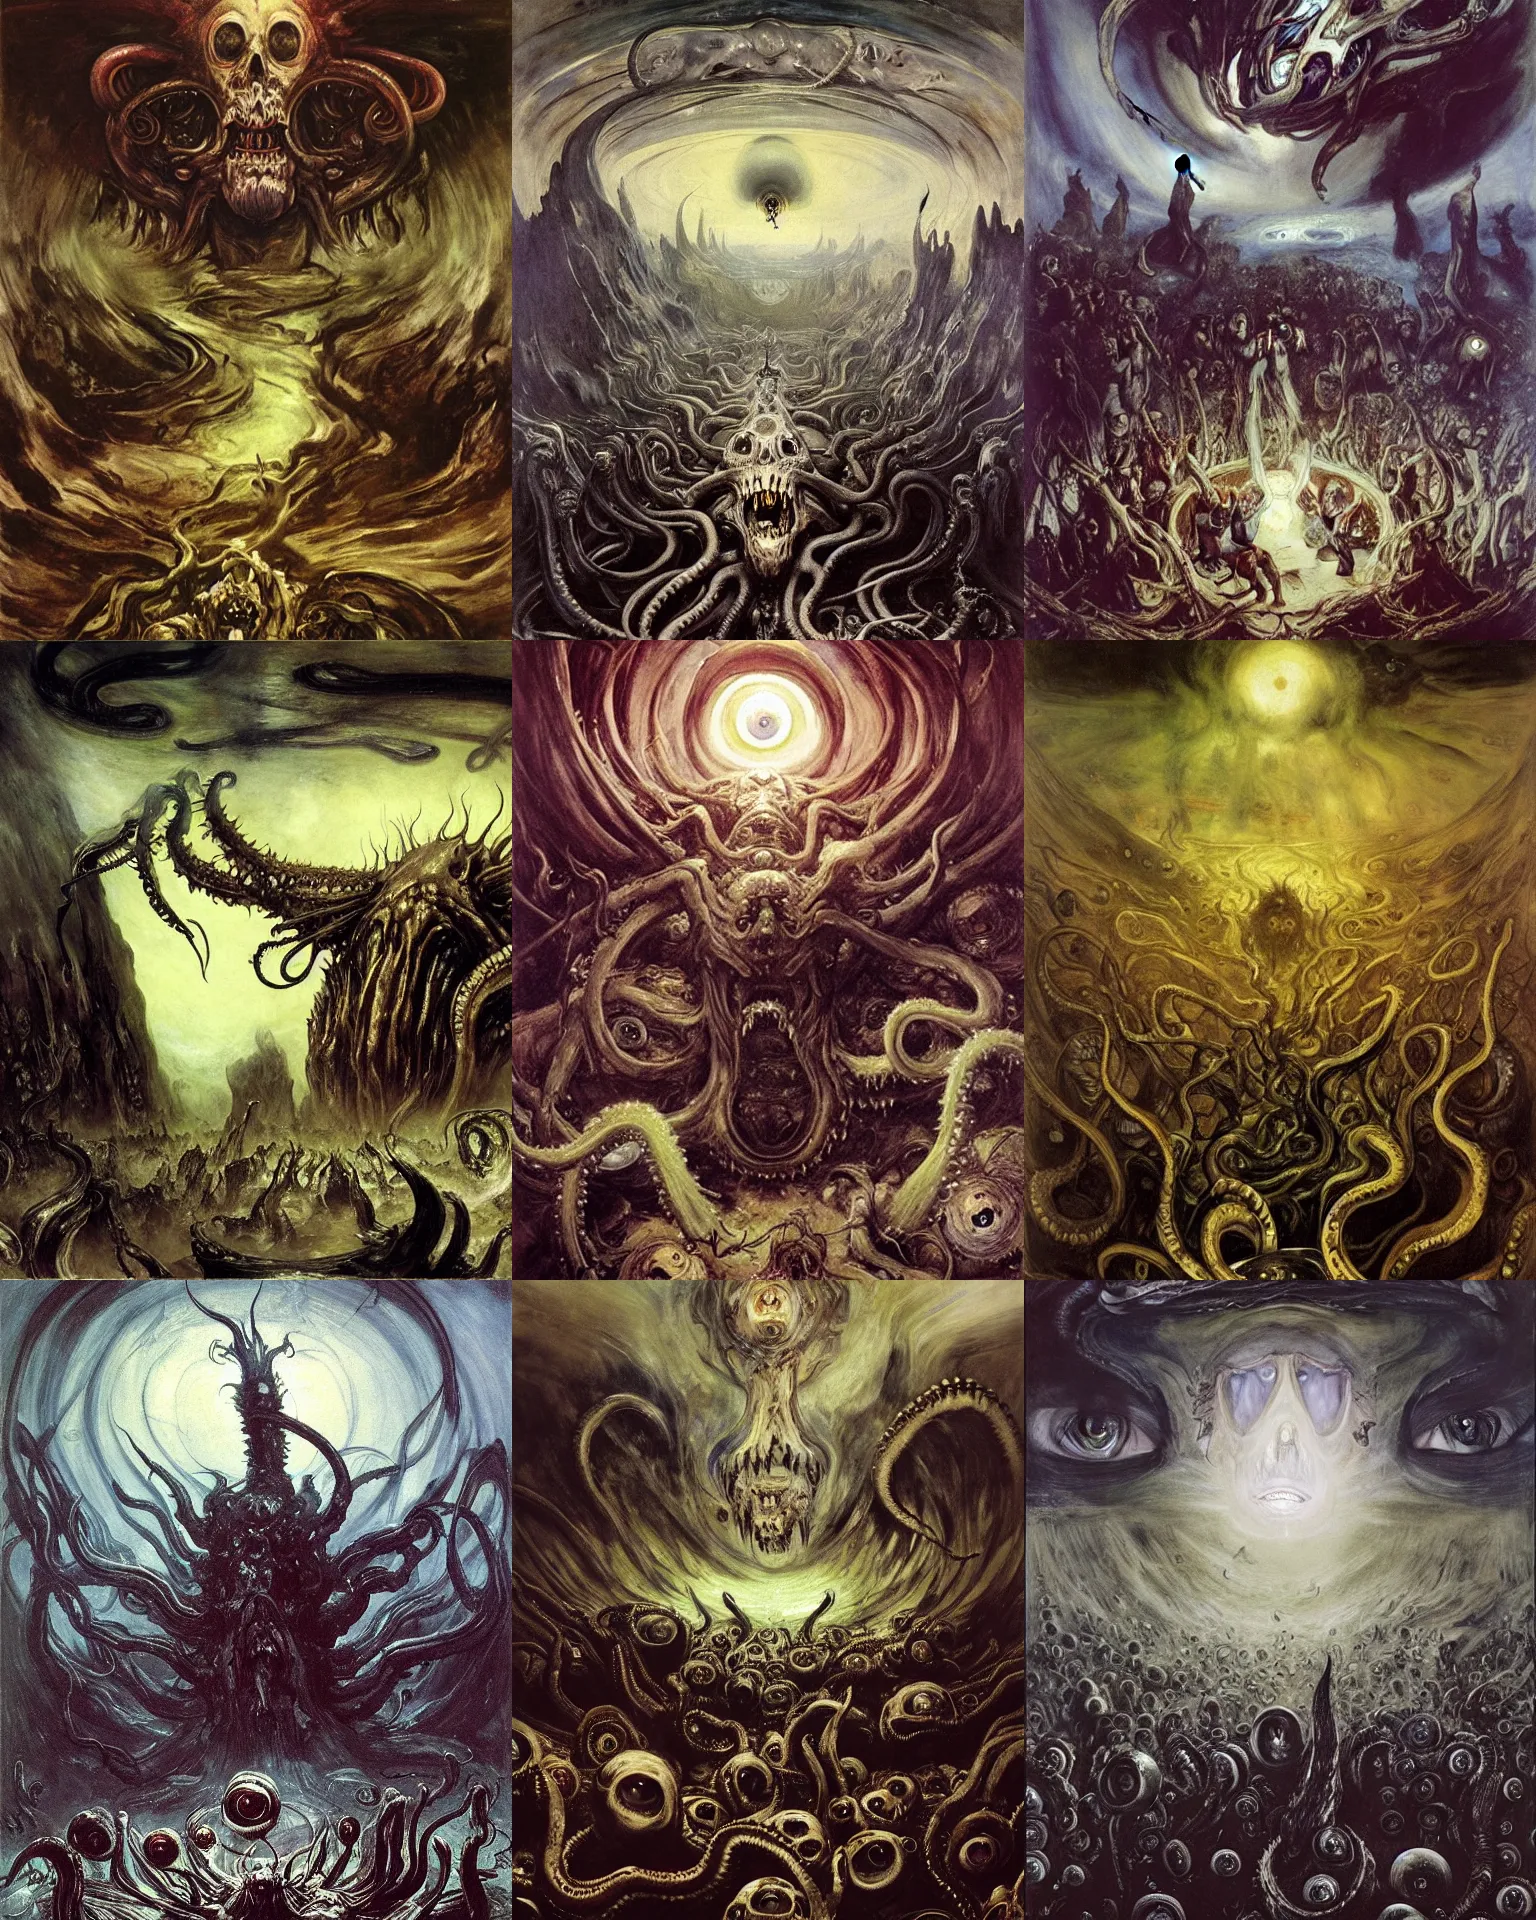 Prompt: ritual of otherworldly massive cthulu god arising a grim obsidian landscape made of giant eyeballs, painting by eugene delacroix, donato giancola, edvard munch john berkey, gustave dore, thomas moran, hieronymus bosch, hp lovecraft, paranoid vibe, terror giant infinite eyes horror spider eyes tentacles maggots feeling of madness and insanity